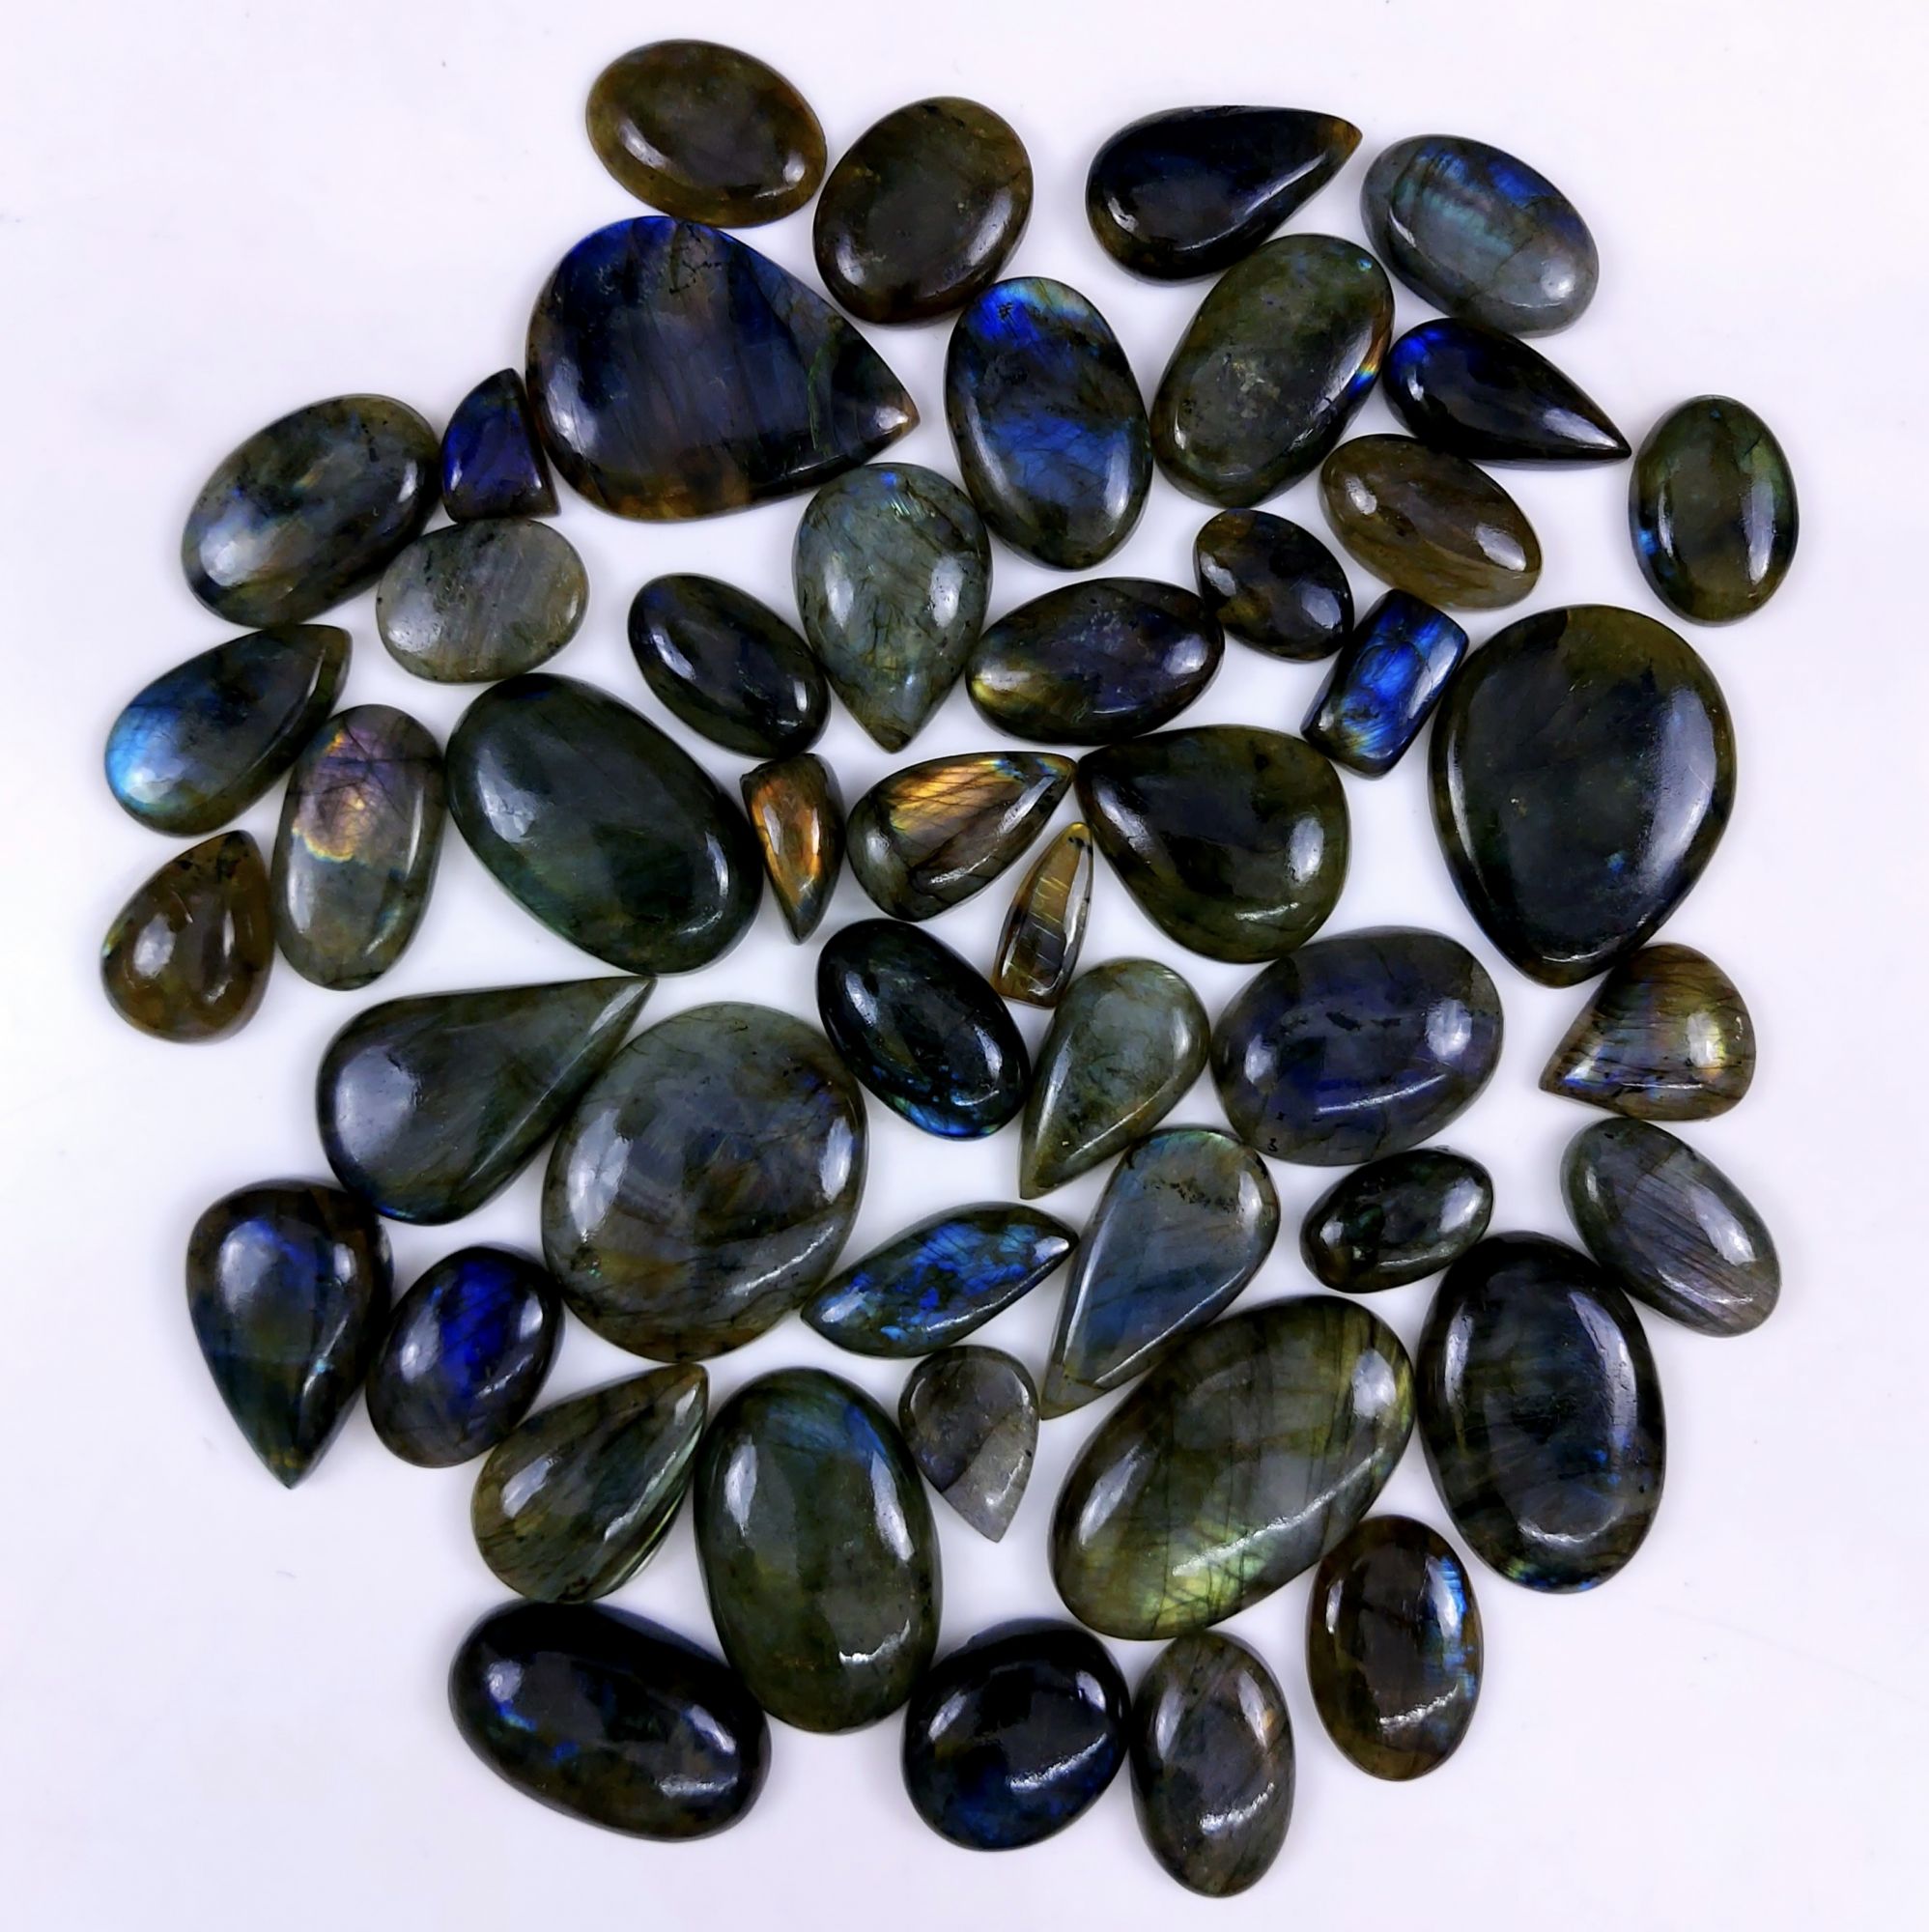 48pc 1765Cts Labradorite Cabochon Multifire Healing Crystal For Jewelry Supplies, Labradorite Necklace Handmade Wire Wrapped Gemstone Pendant 40x35 16x13mm#6351